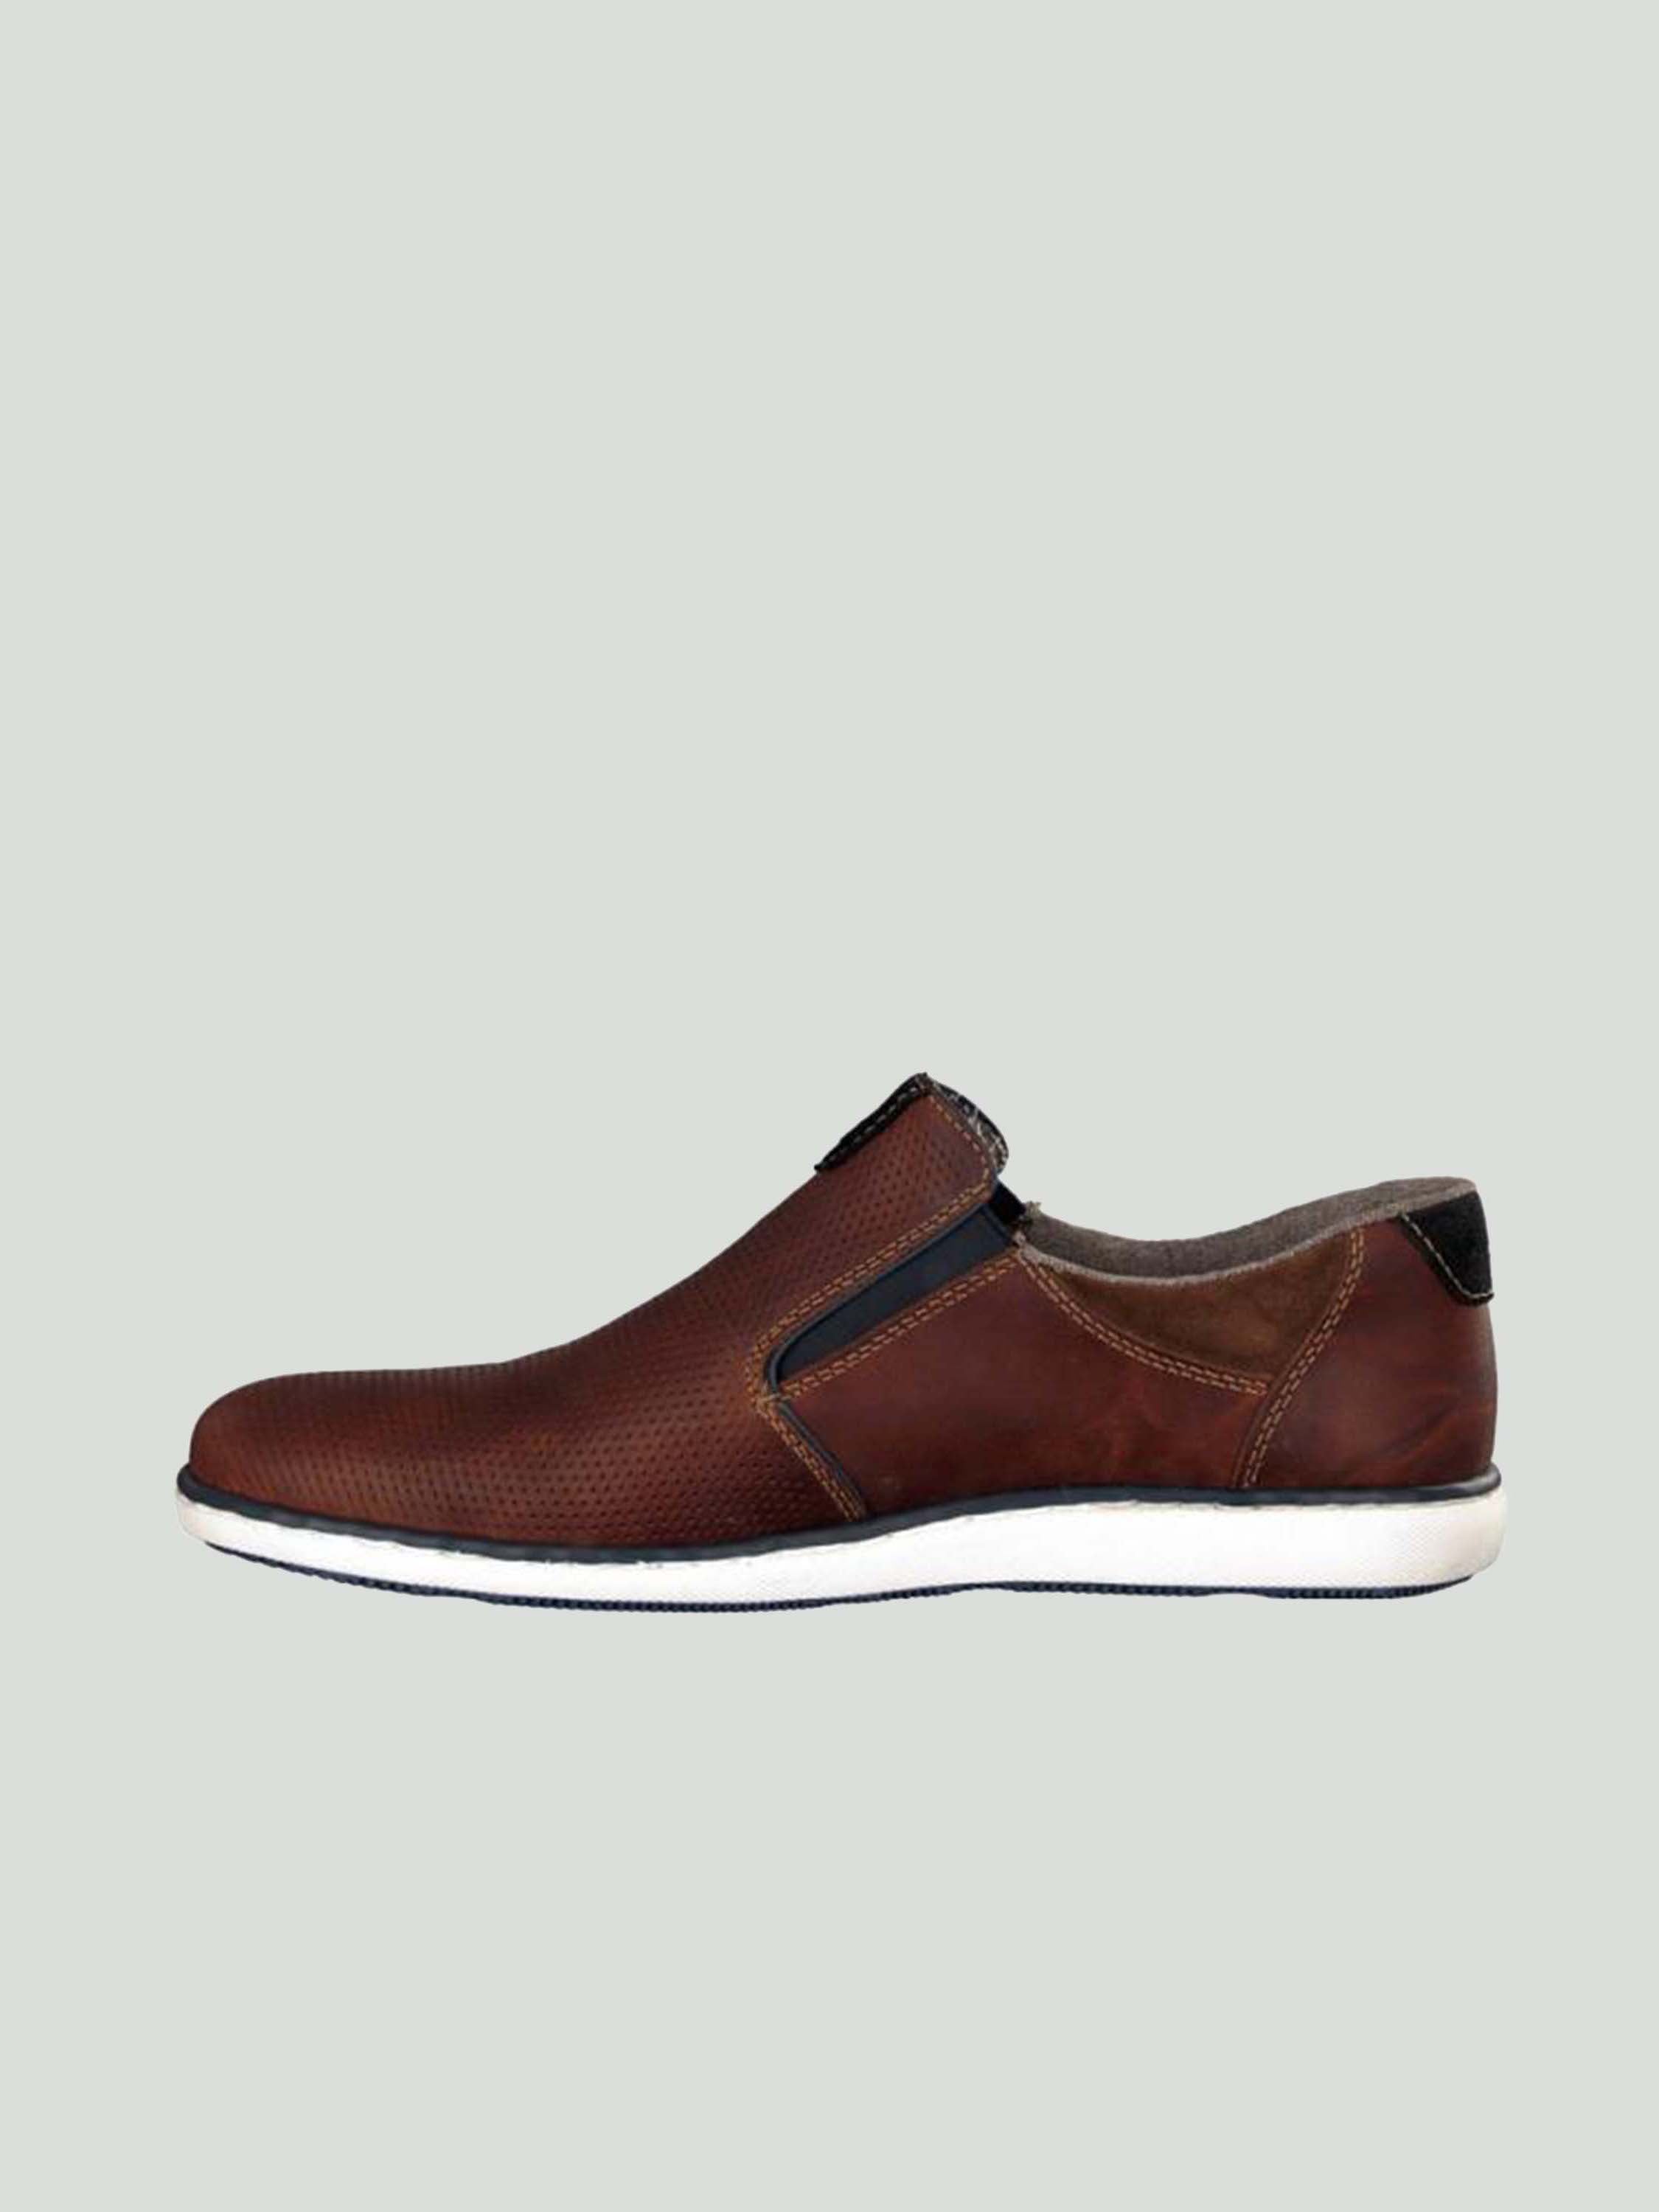 Rieker 17861 Men's Slip On Casual Leather Shoes #color_Brown